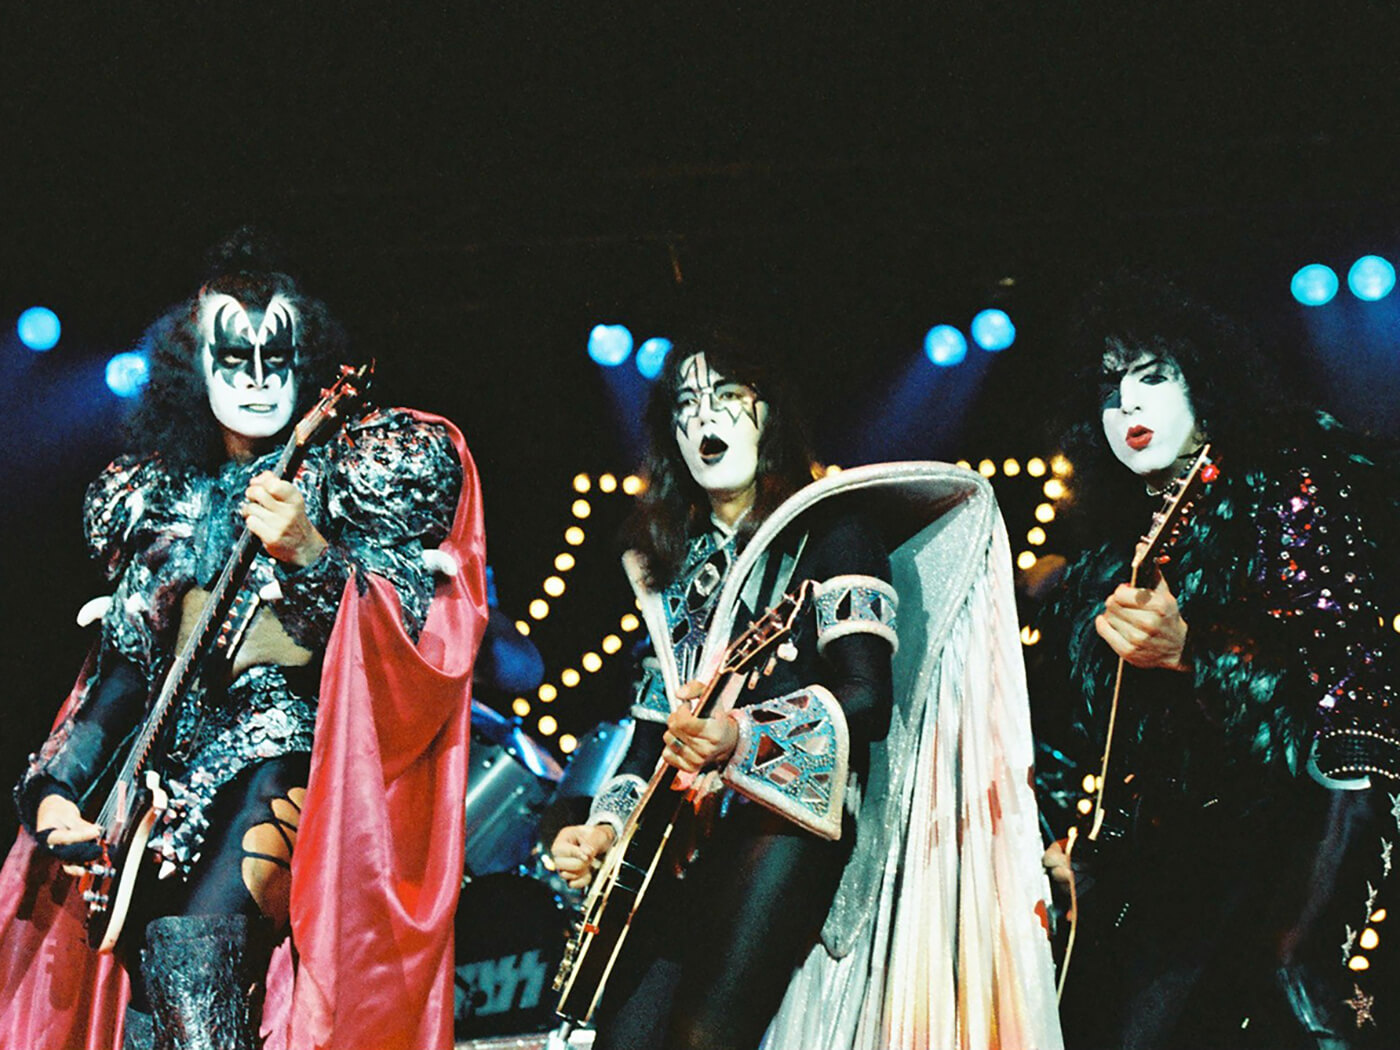 Gene Simmons, Ace Frehley and Paul Stanley of KISS performing in 1980, photo by Pete Still/Redferns via Getty Images